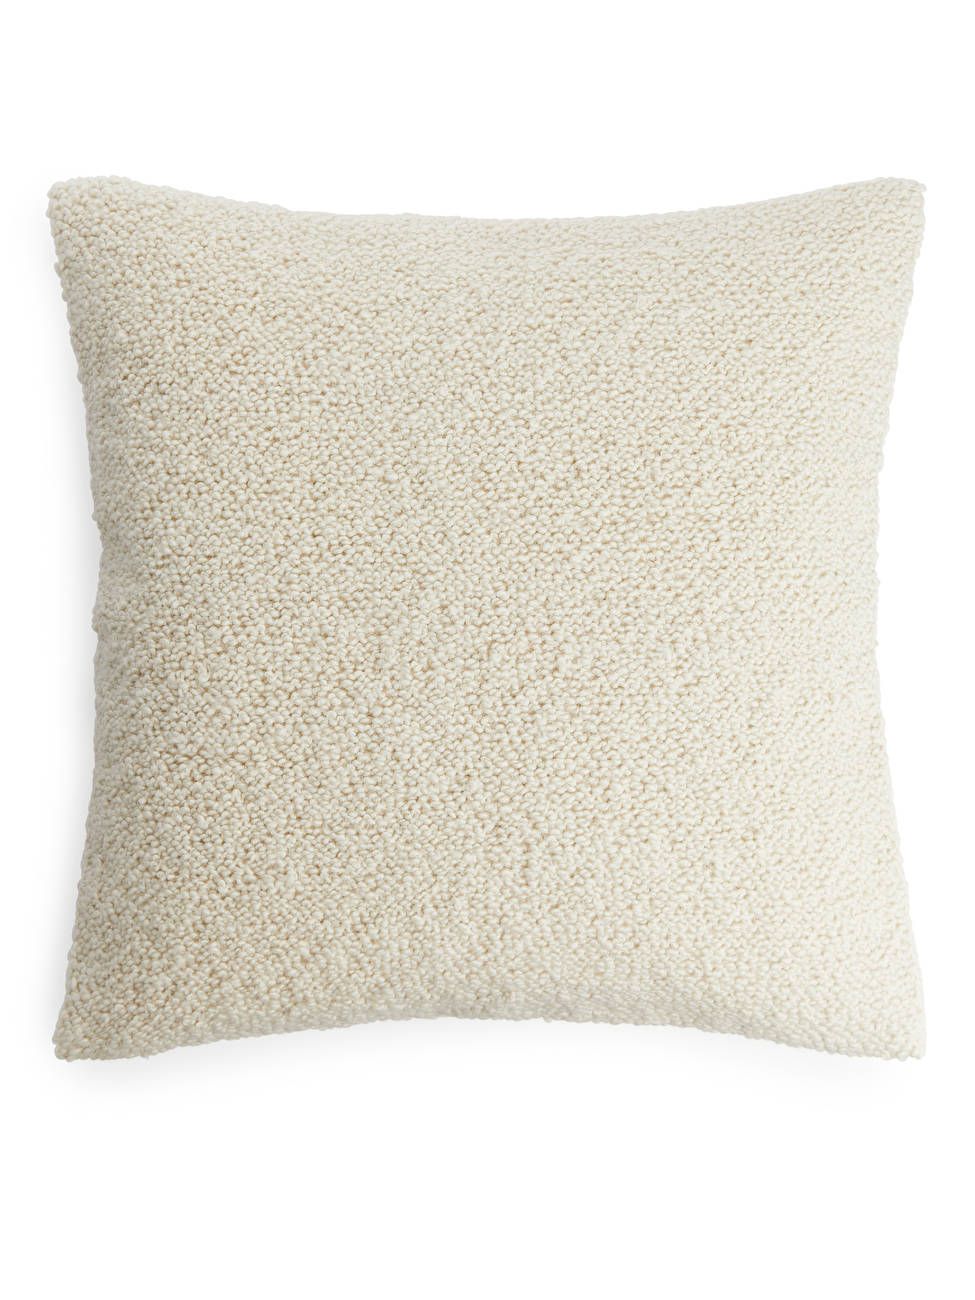 Handwoven Wool Cushion Cover | ARKET